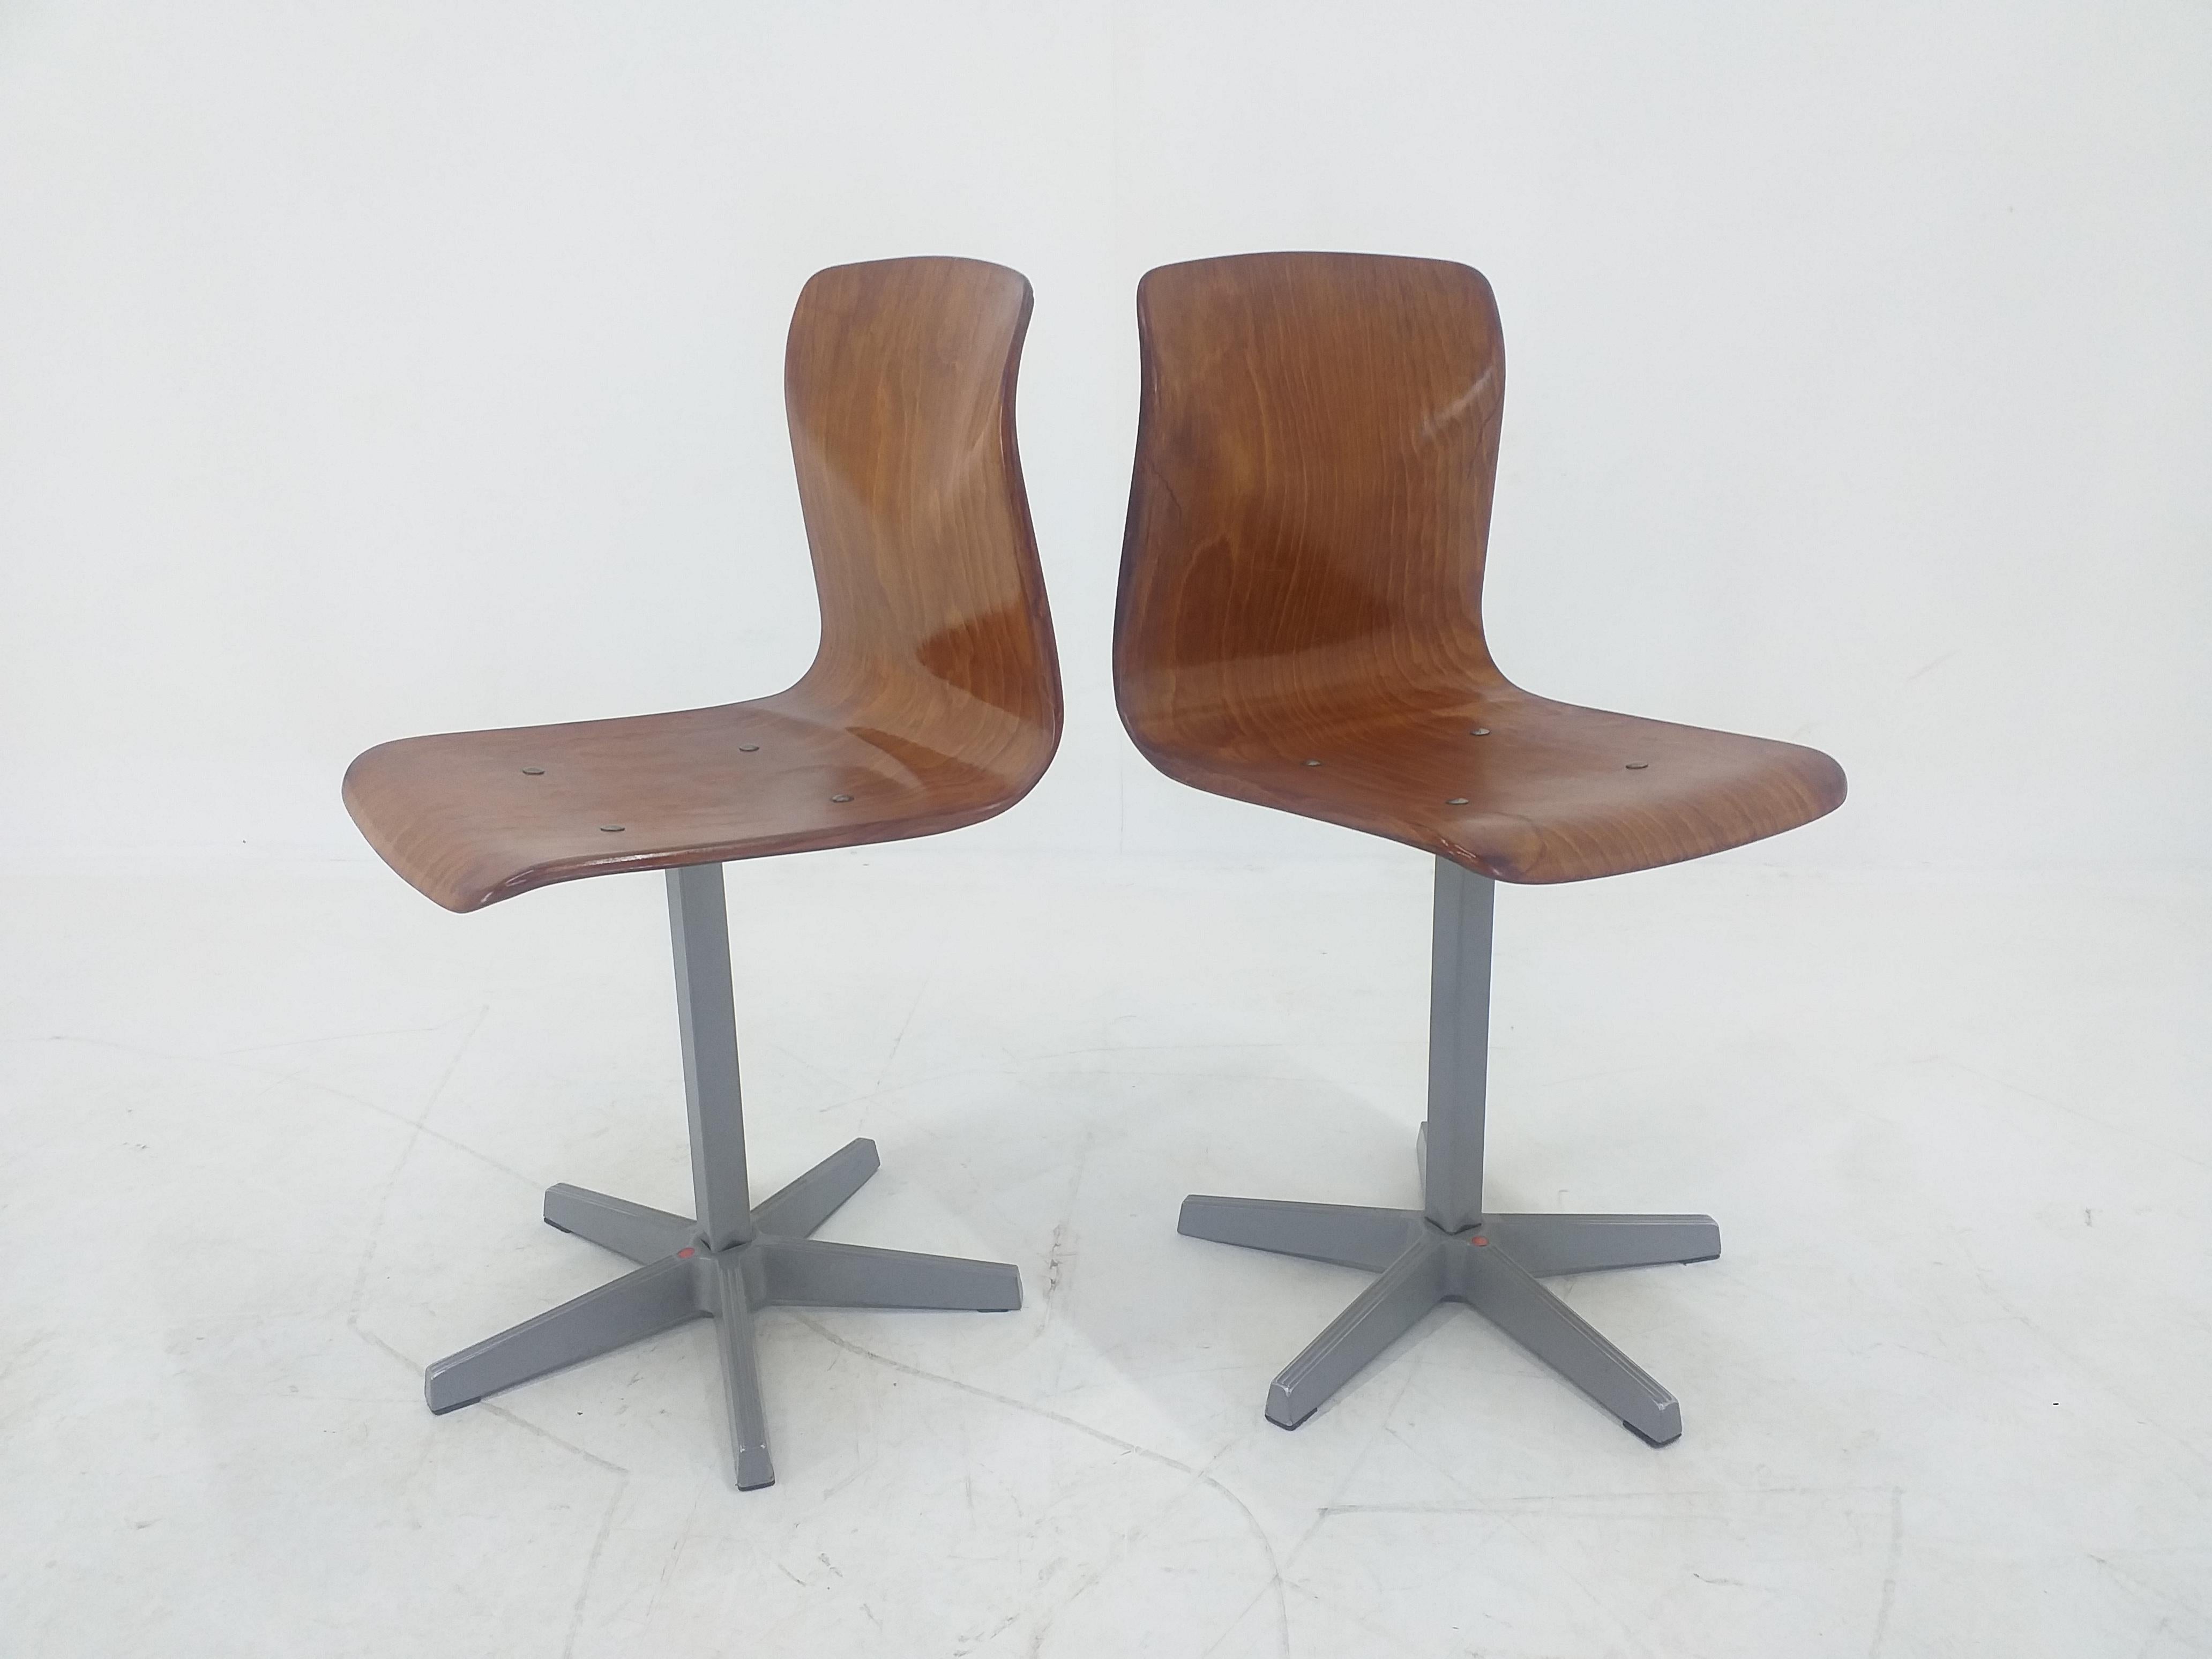 Pair of Midcentury Child's Chairs Pagholz, Germany, 1970s For Sale 1